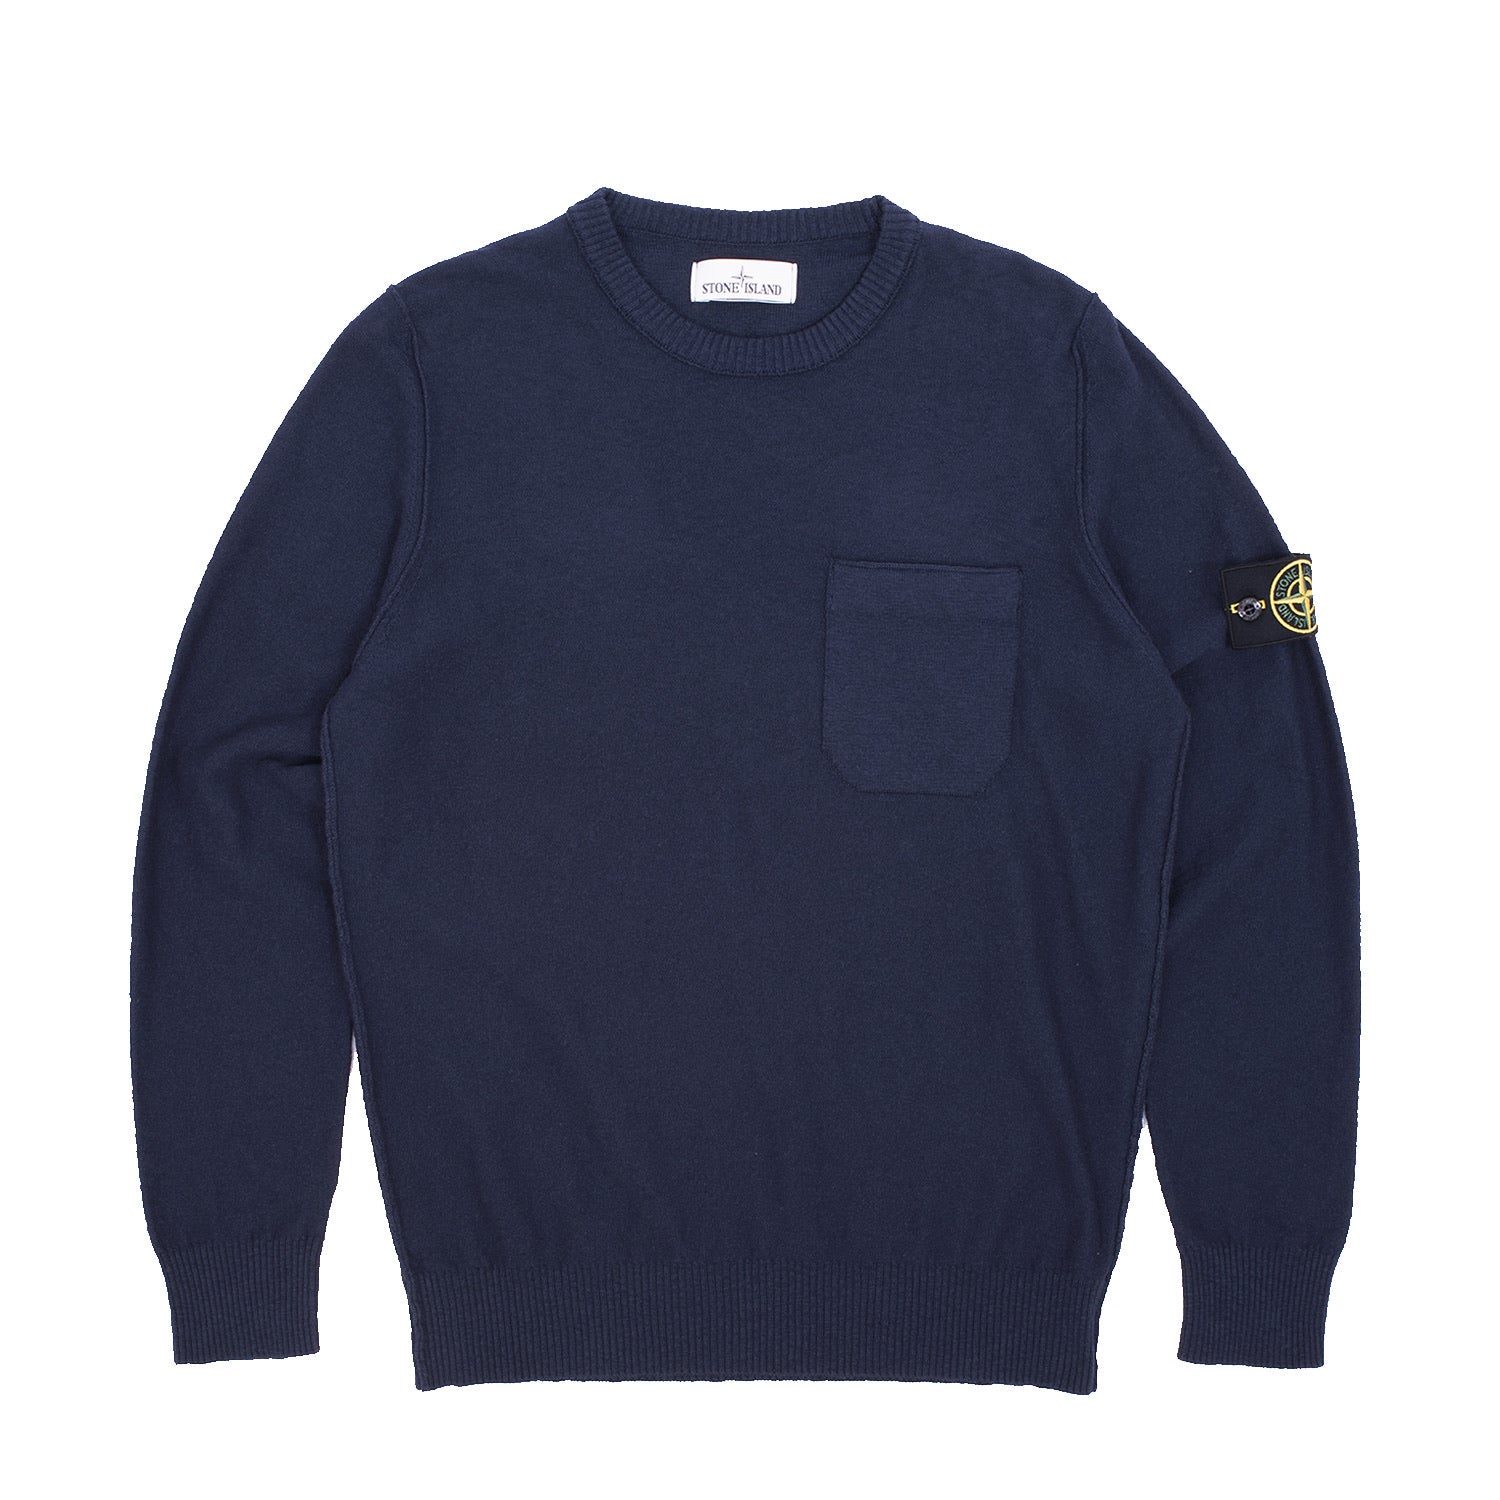 Stone Island Blue Knit Pocket Sweater - Centrall Online